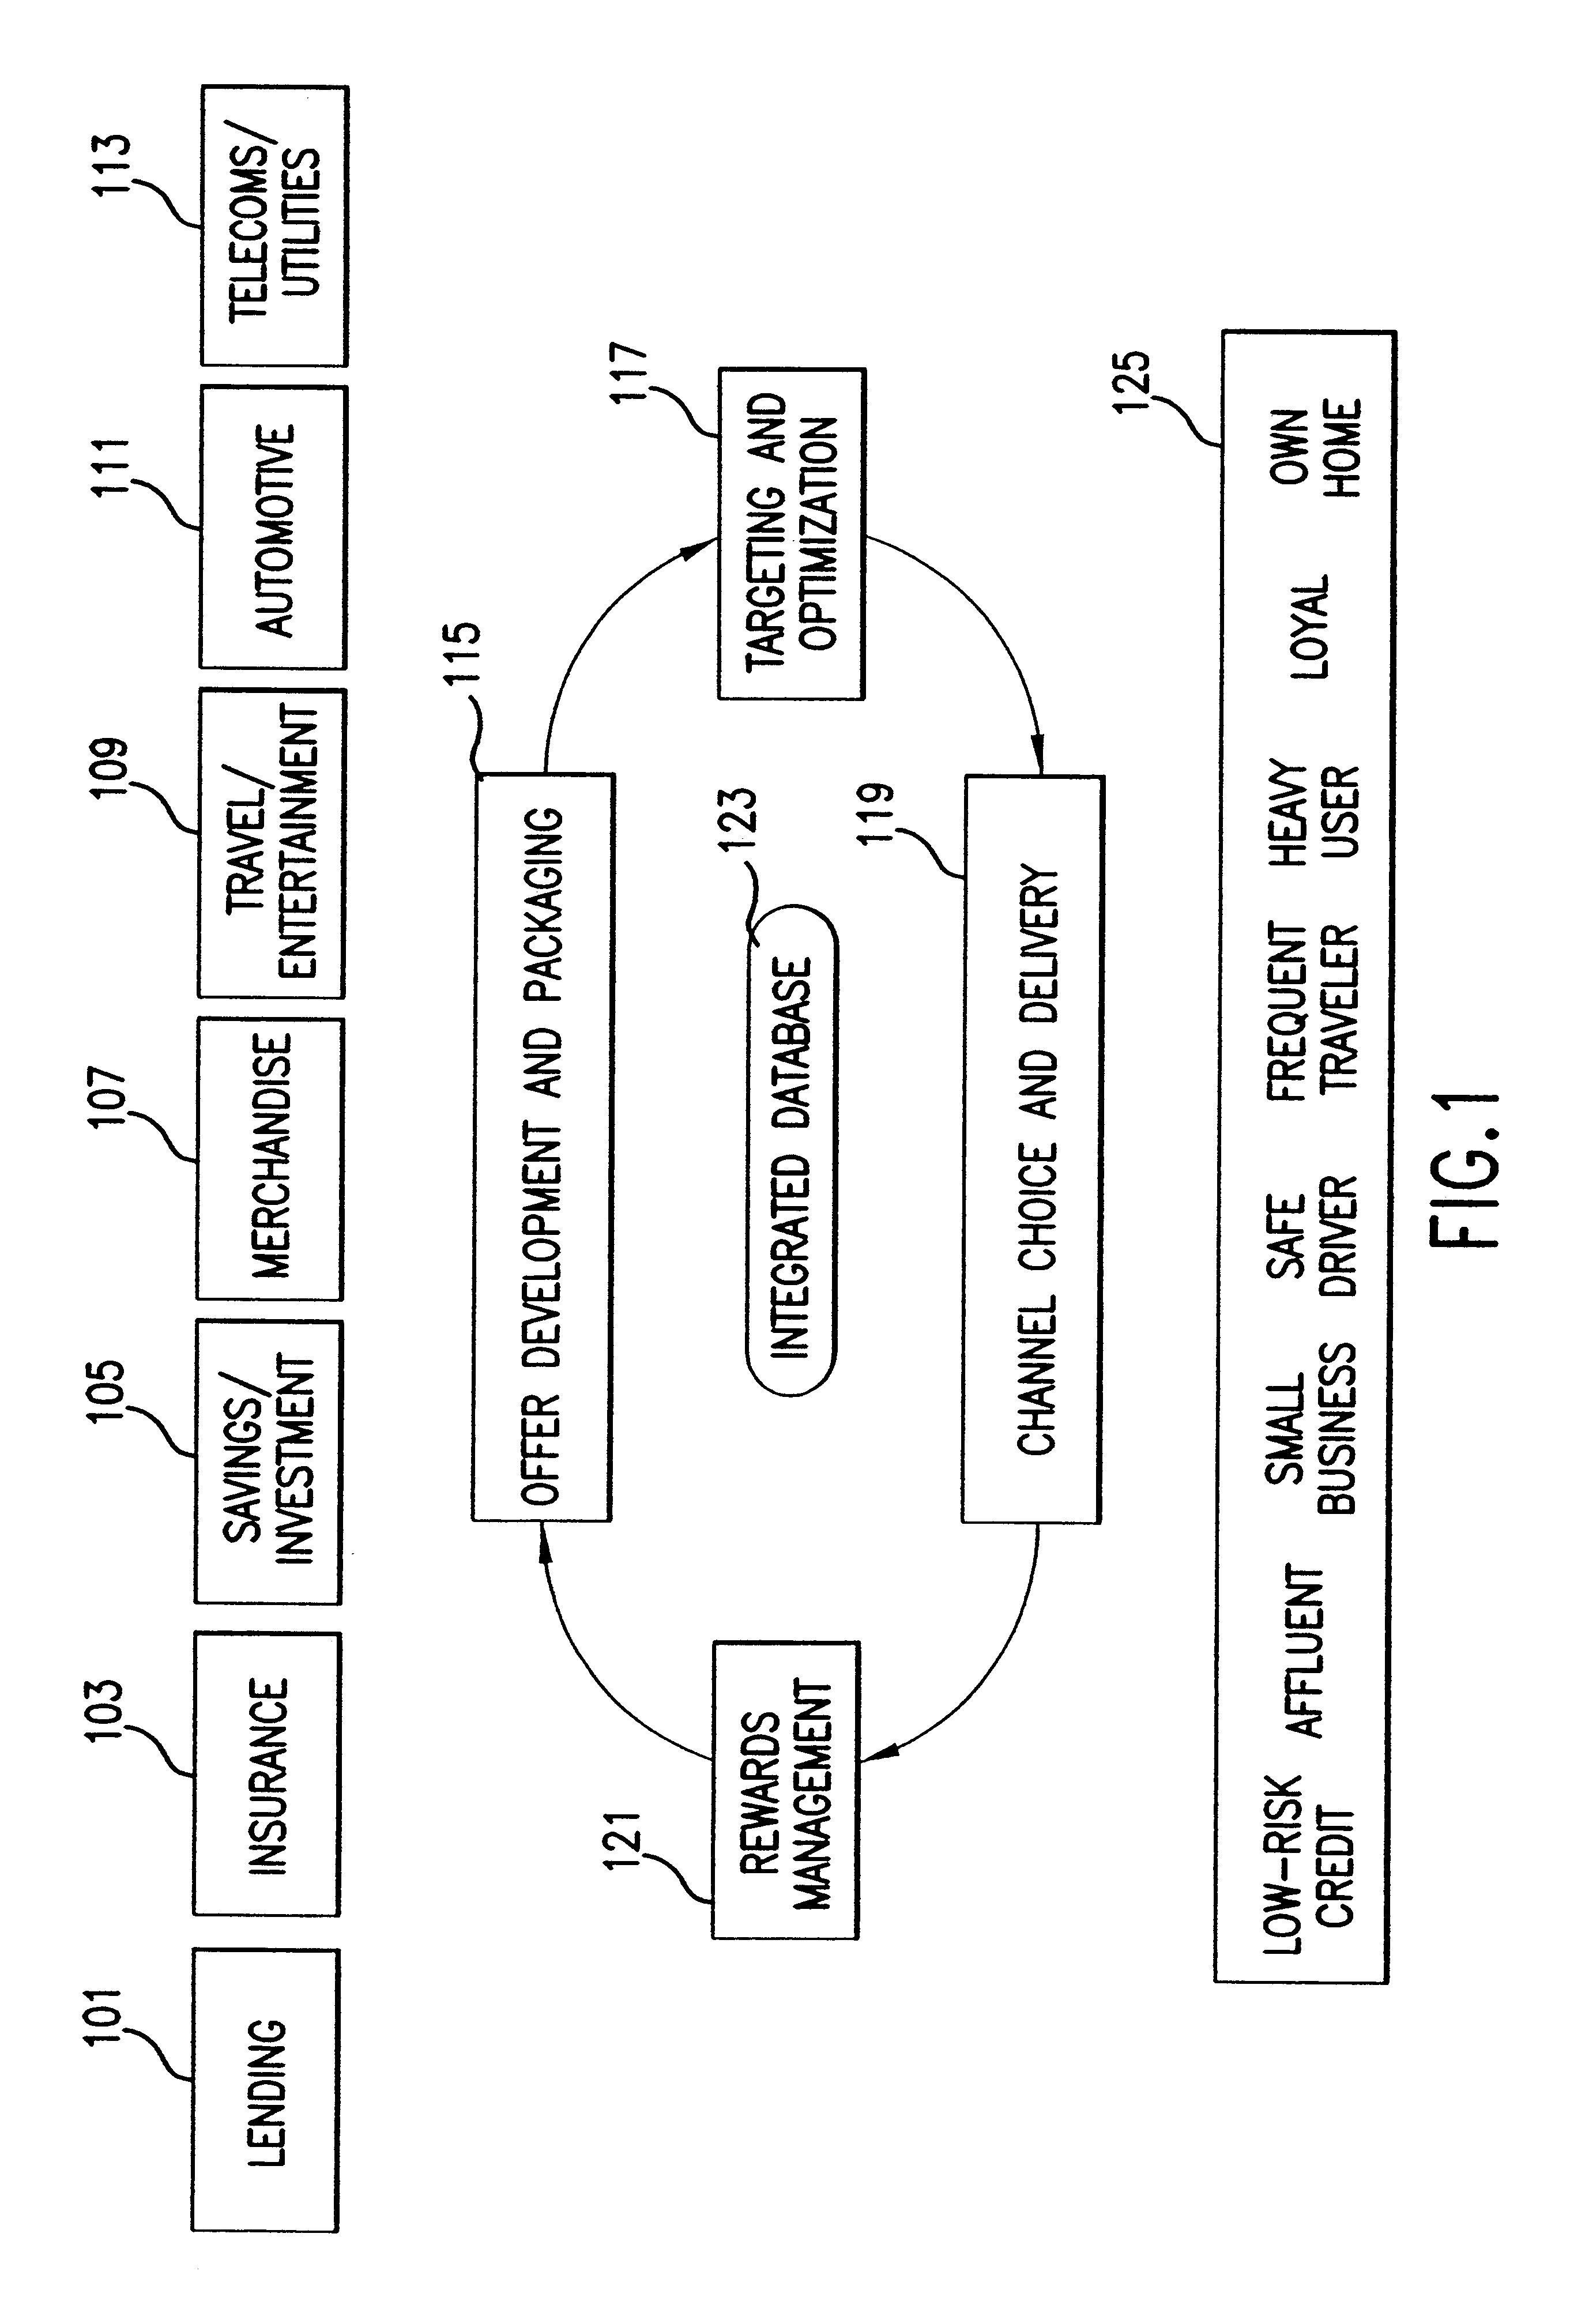 System and method of targeted marketing